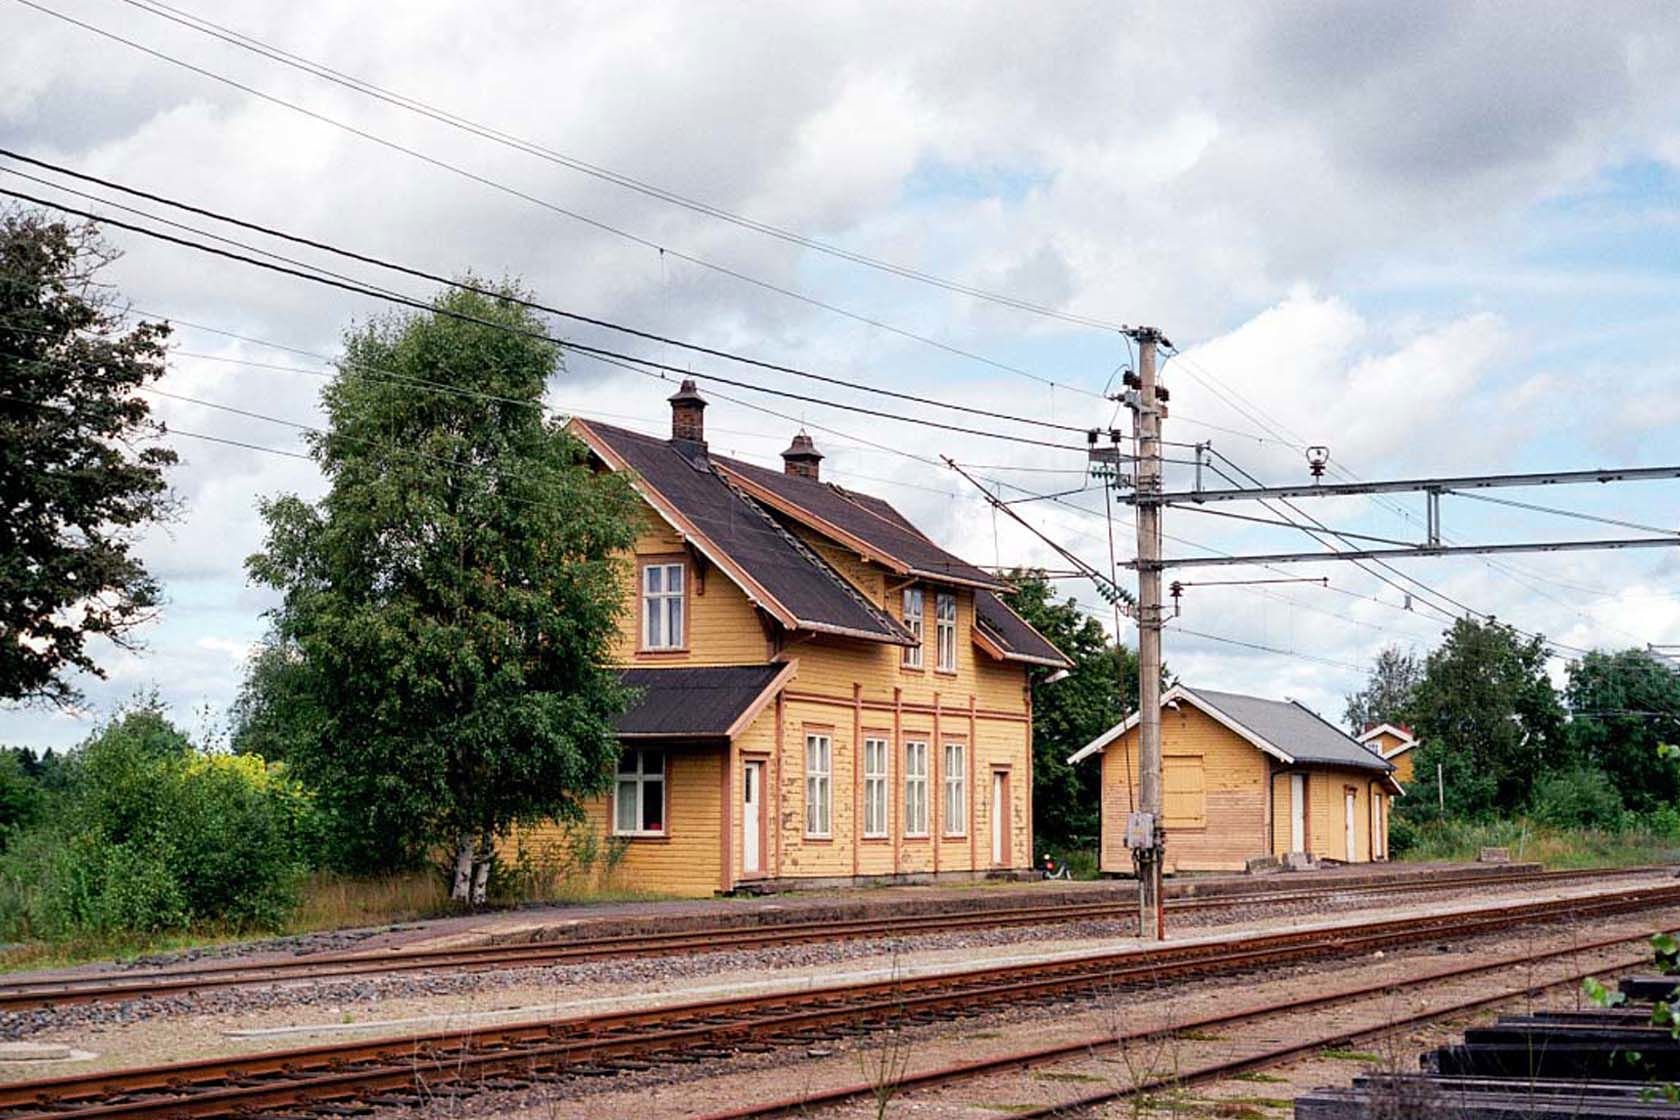 Tracks and station building at Lauve station